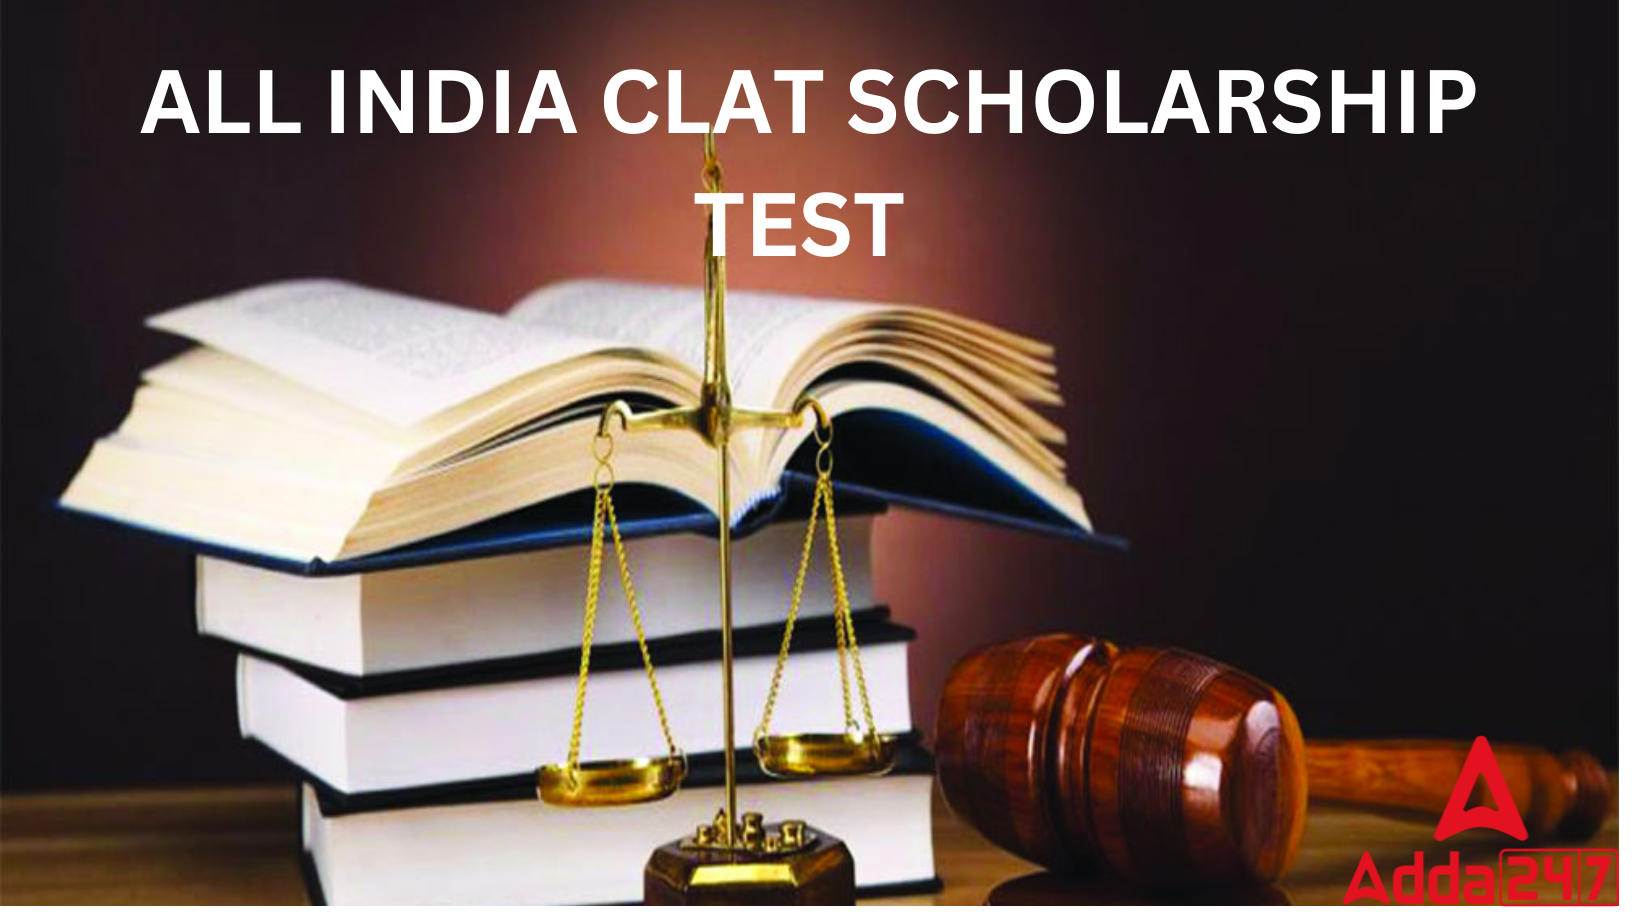 ALL INDIA CLAT SCHOLARSHIP TEST